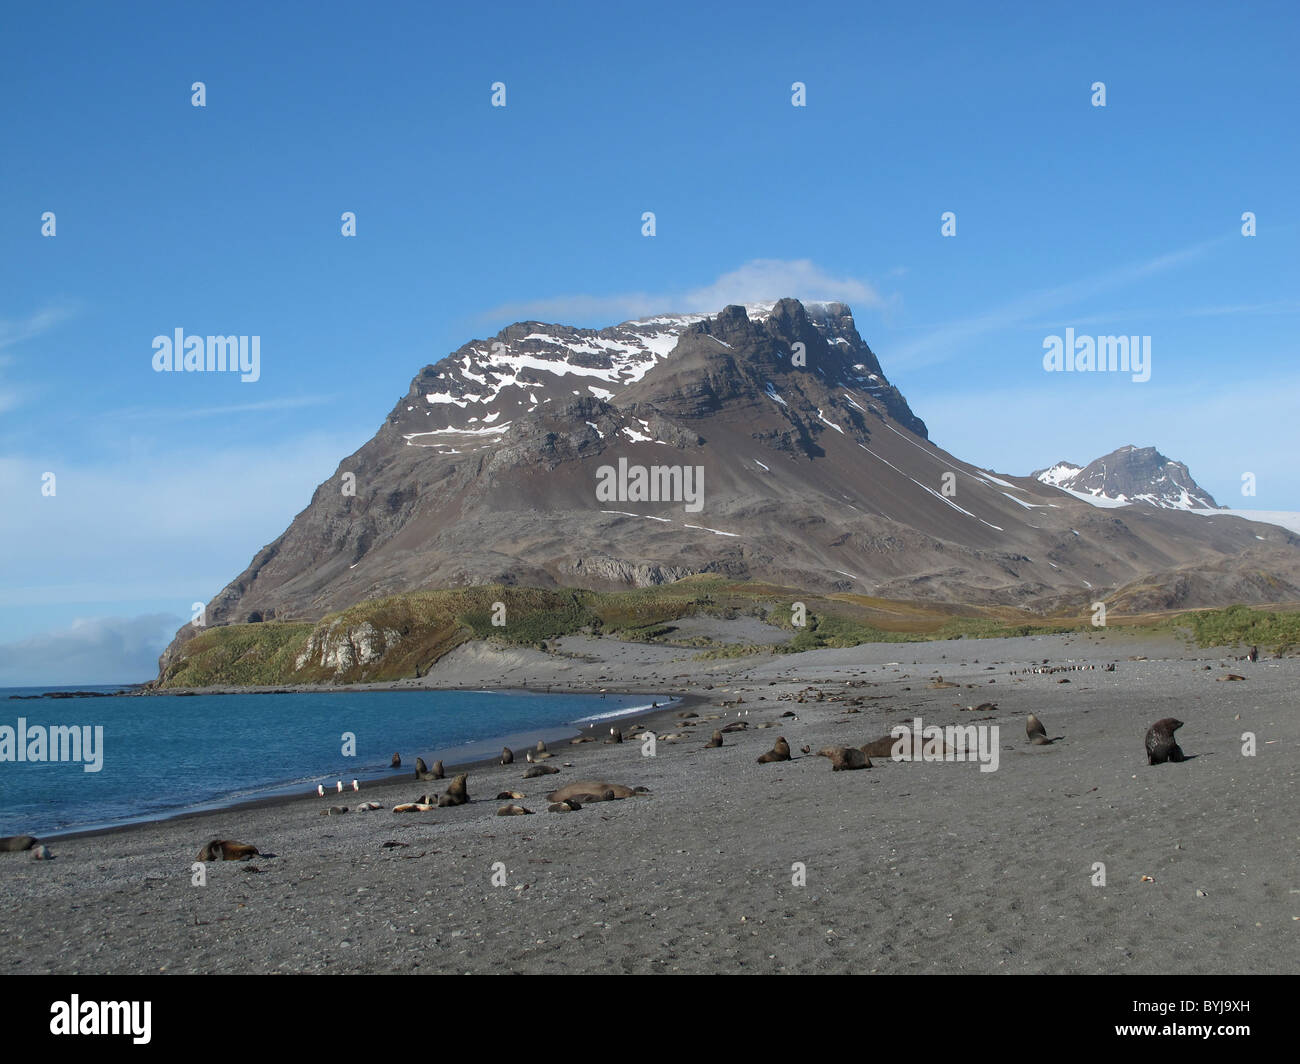 Elephant seals and South Georgia Fur Seals at a beach in front of a mountain, Possession Bay, South Georgia Stock Photo